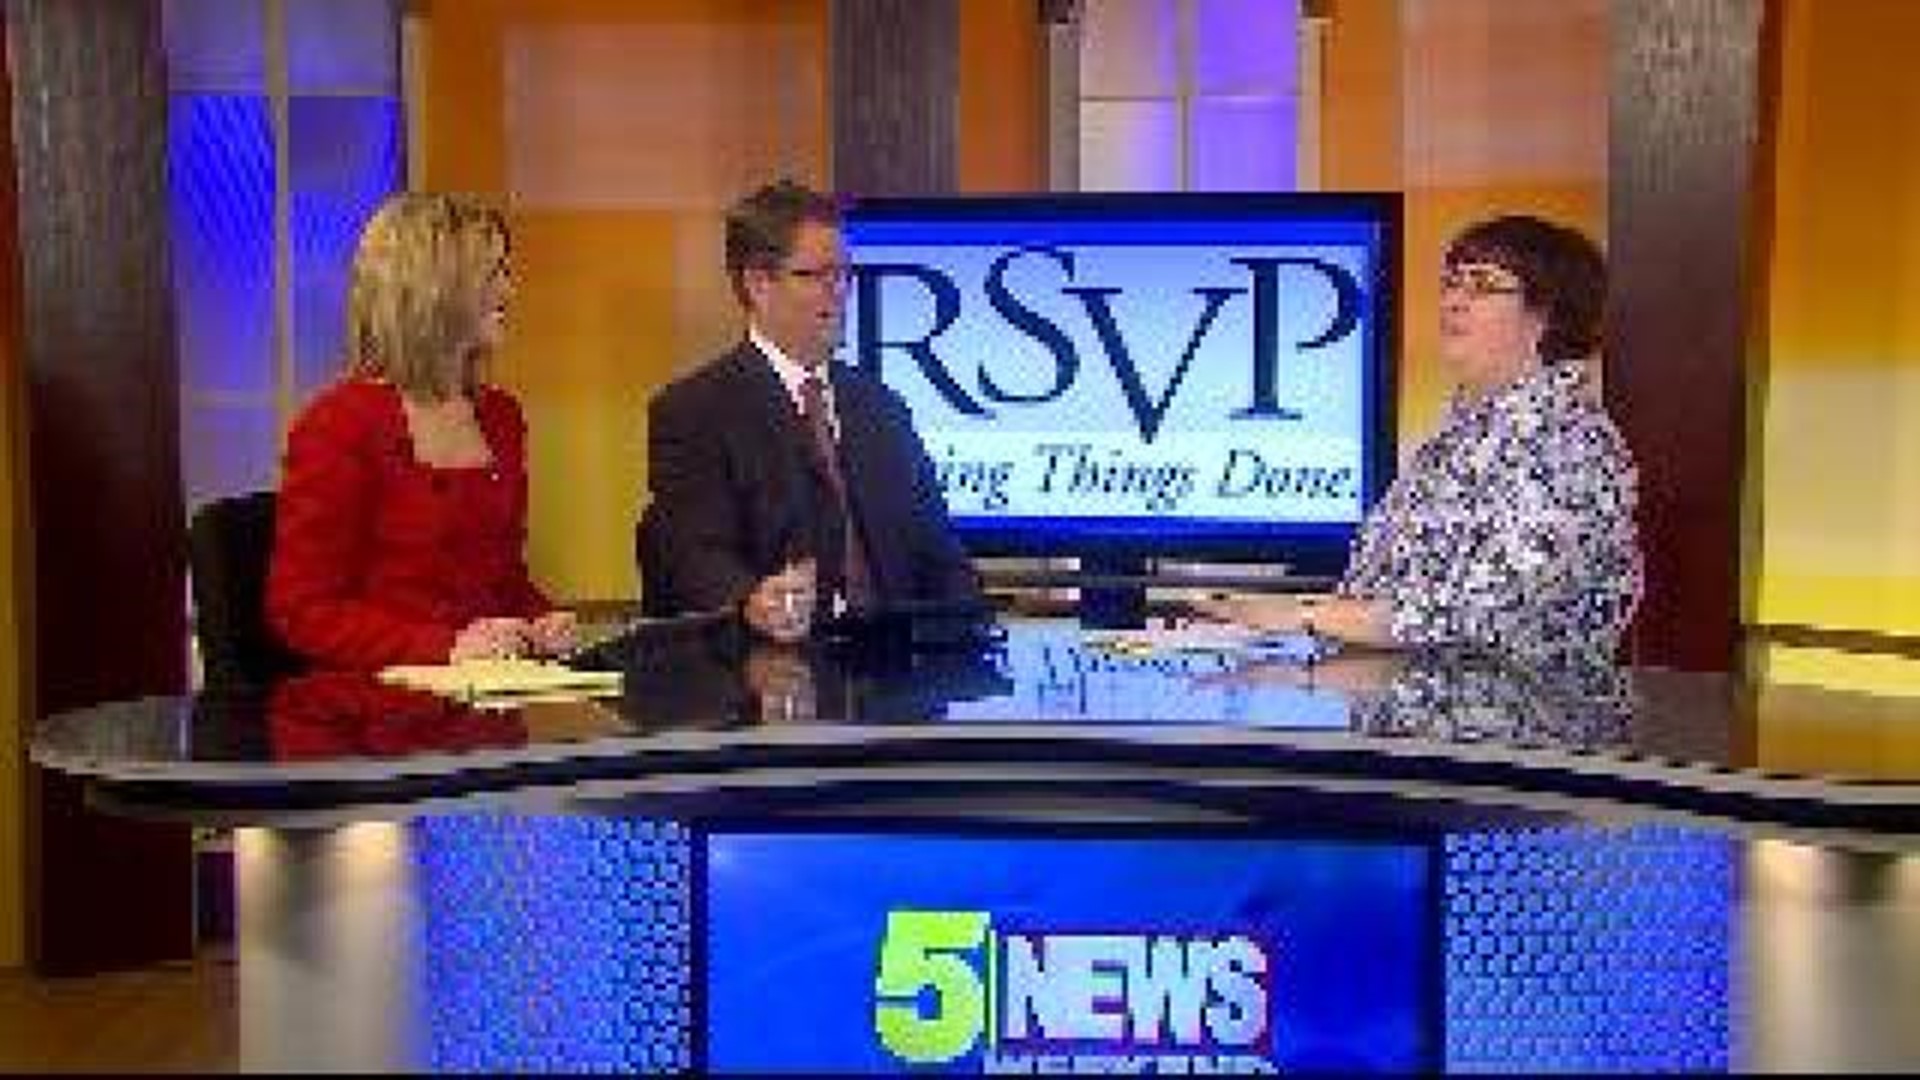 VIDEO: RSVP Offers Free Tax Help